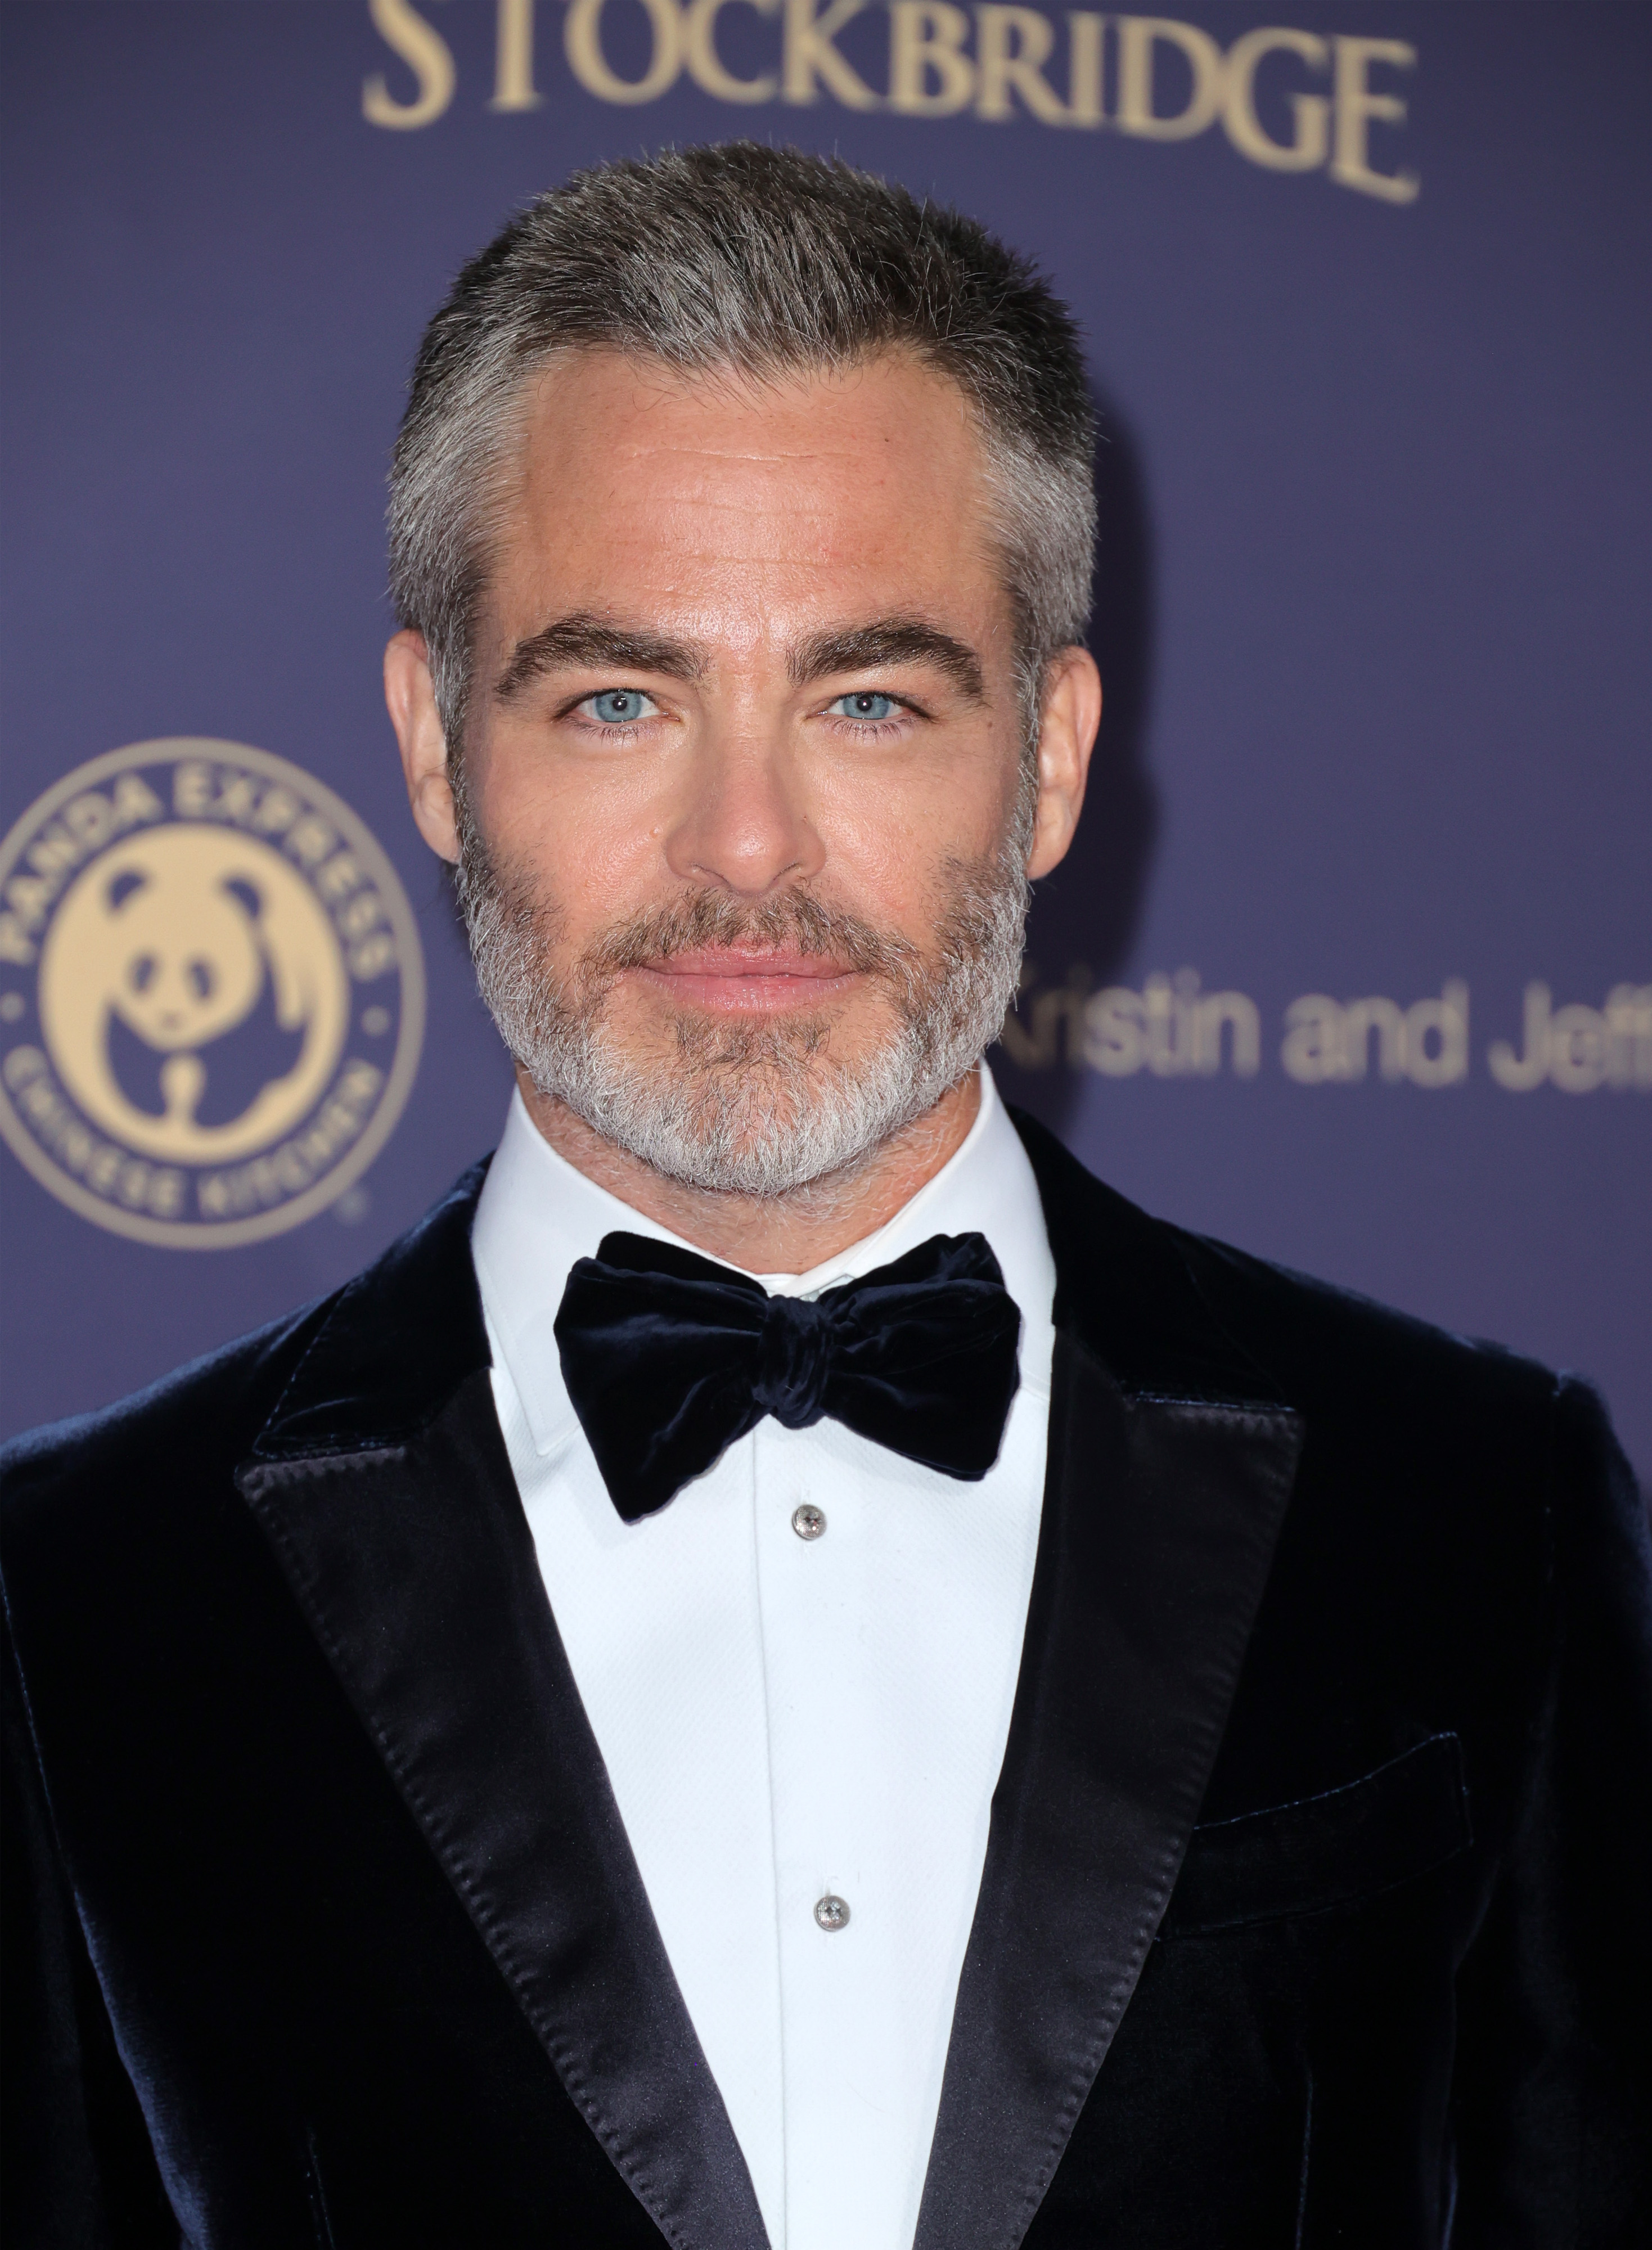 Chris Pine attends Children's Hospital Los Angeles 2022 CHLA Gala on October 8, 2022 in Santa Monica, California. | Source: Getty Images